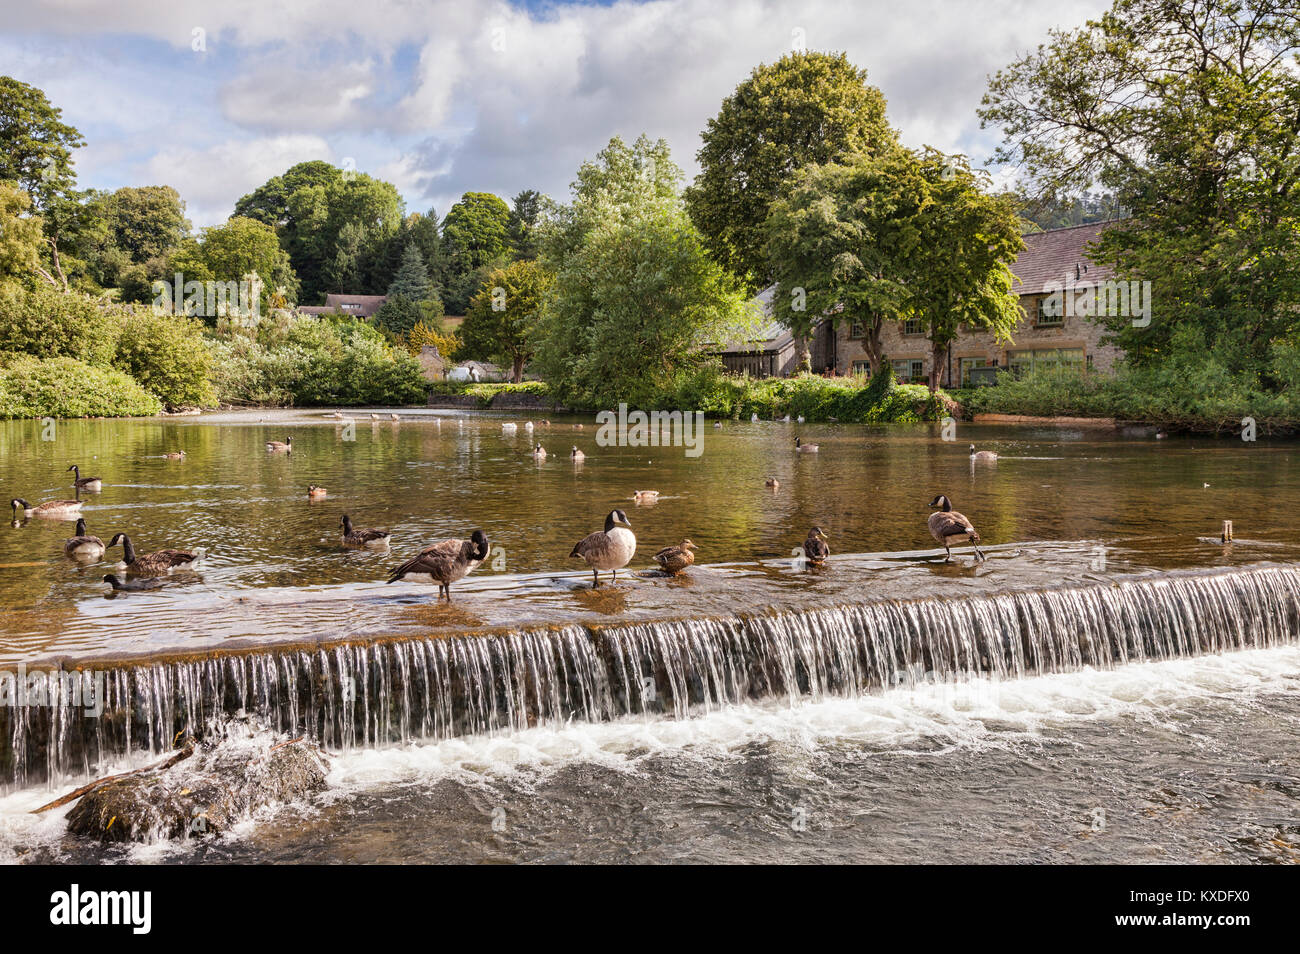 Canada geese and ducks on the weir on the River Wye at Bakewell, Derbyshire, England Stock Photo